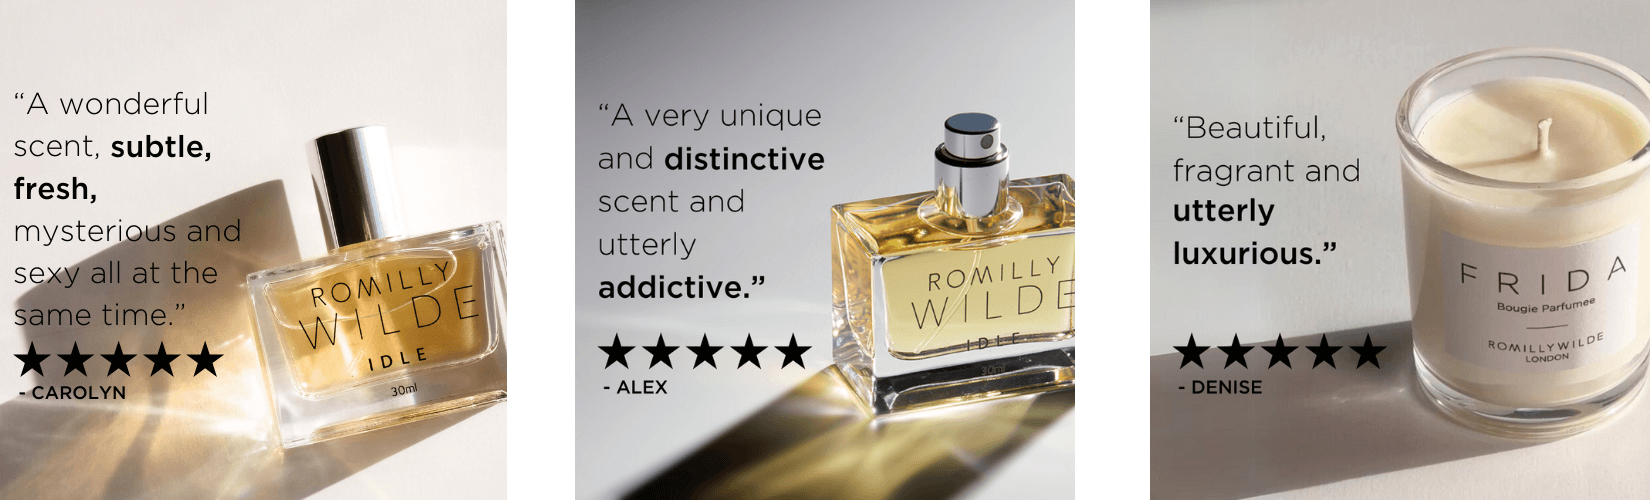 Three images - from left to right, two images of a perfume bottle with a 5 star review quote and one image of a candle with a 5 star review with a quote. 